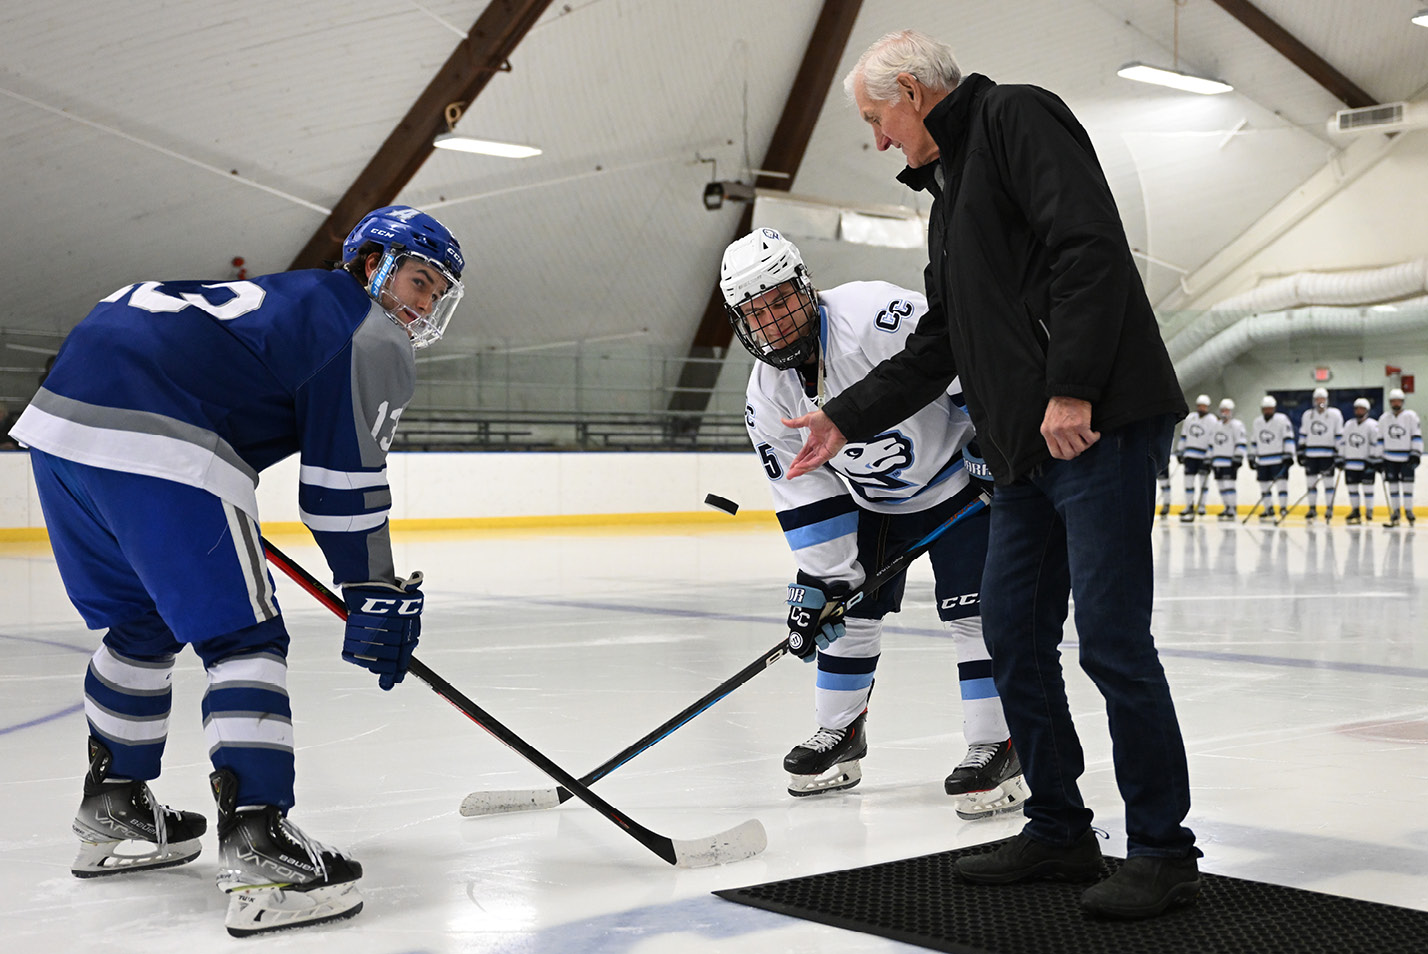 Former Camels men’s ice hockey coach Doug Roberts drops the puck on the ice.